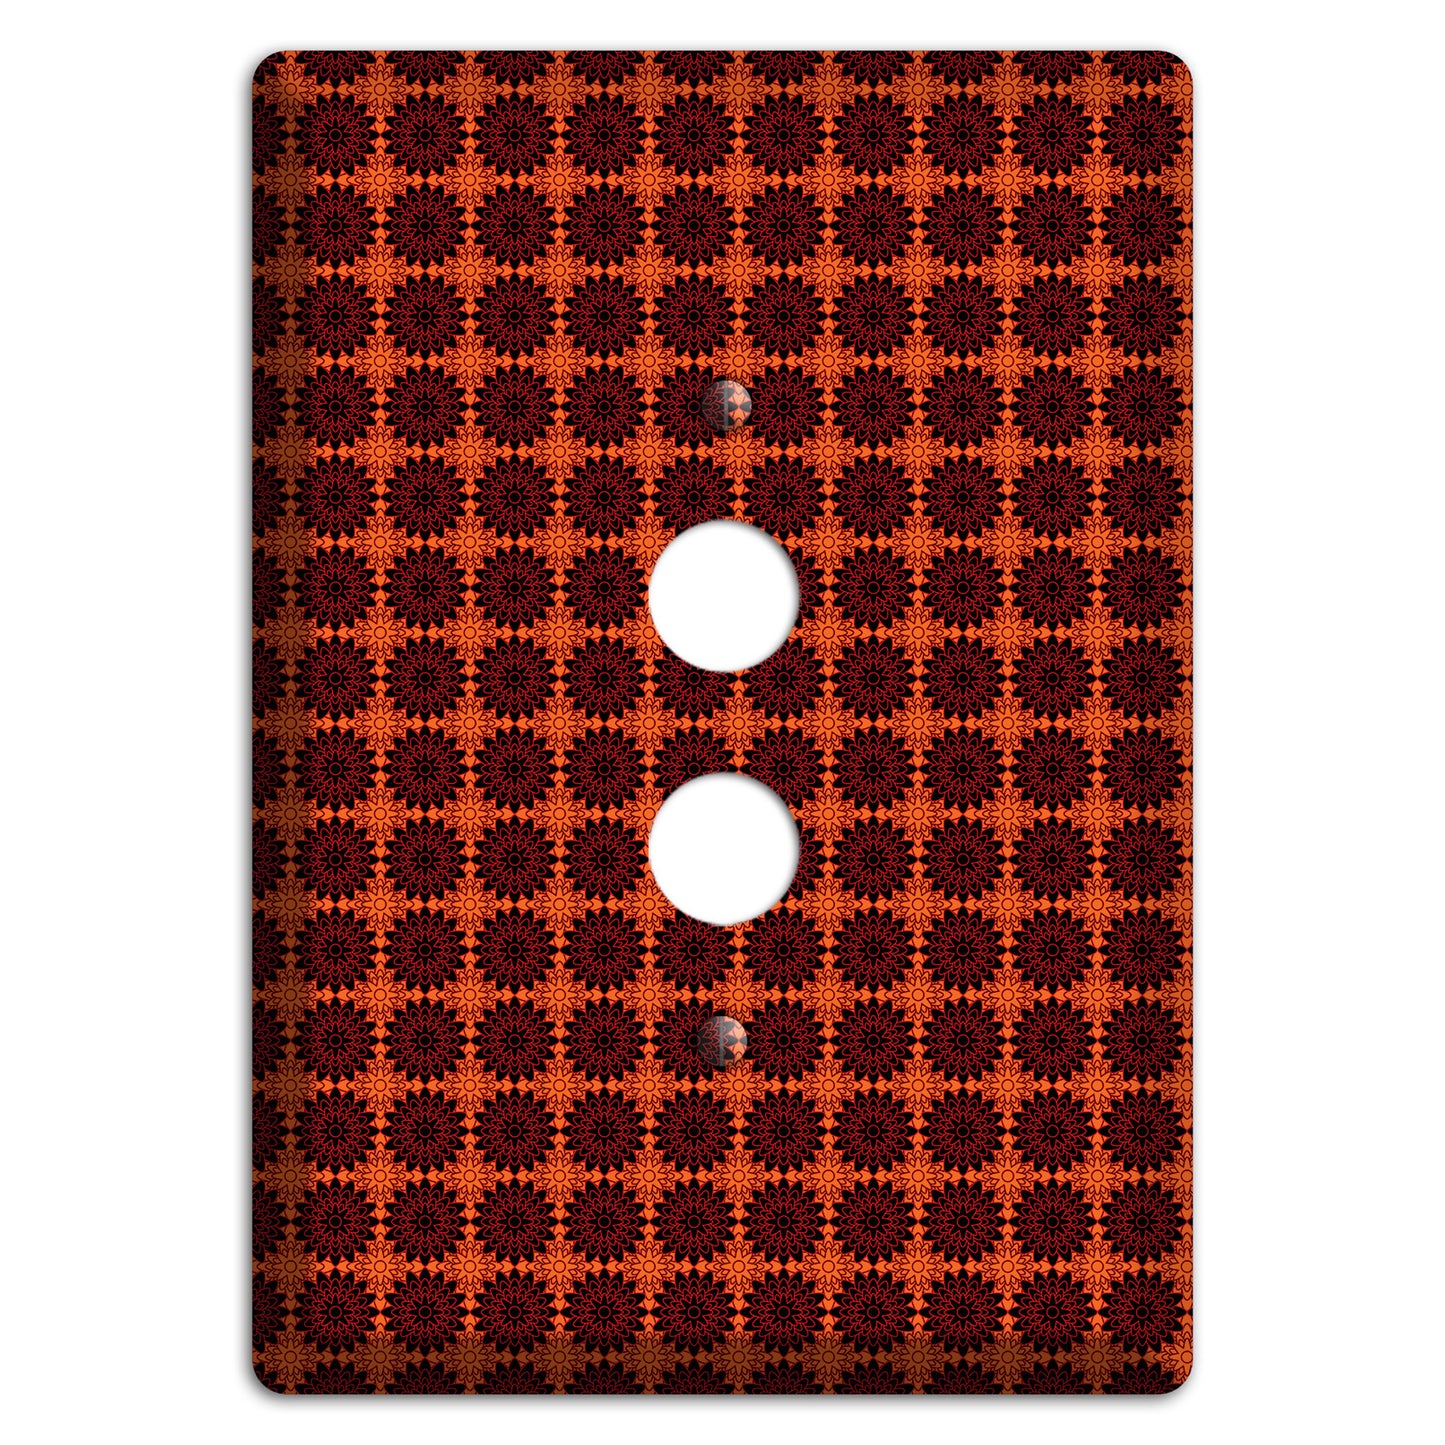 Red with Tiled Maroon Foulard 1 Pushbutton Wallplate